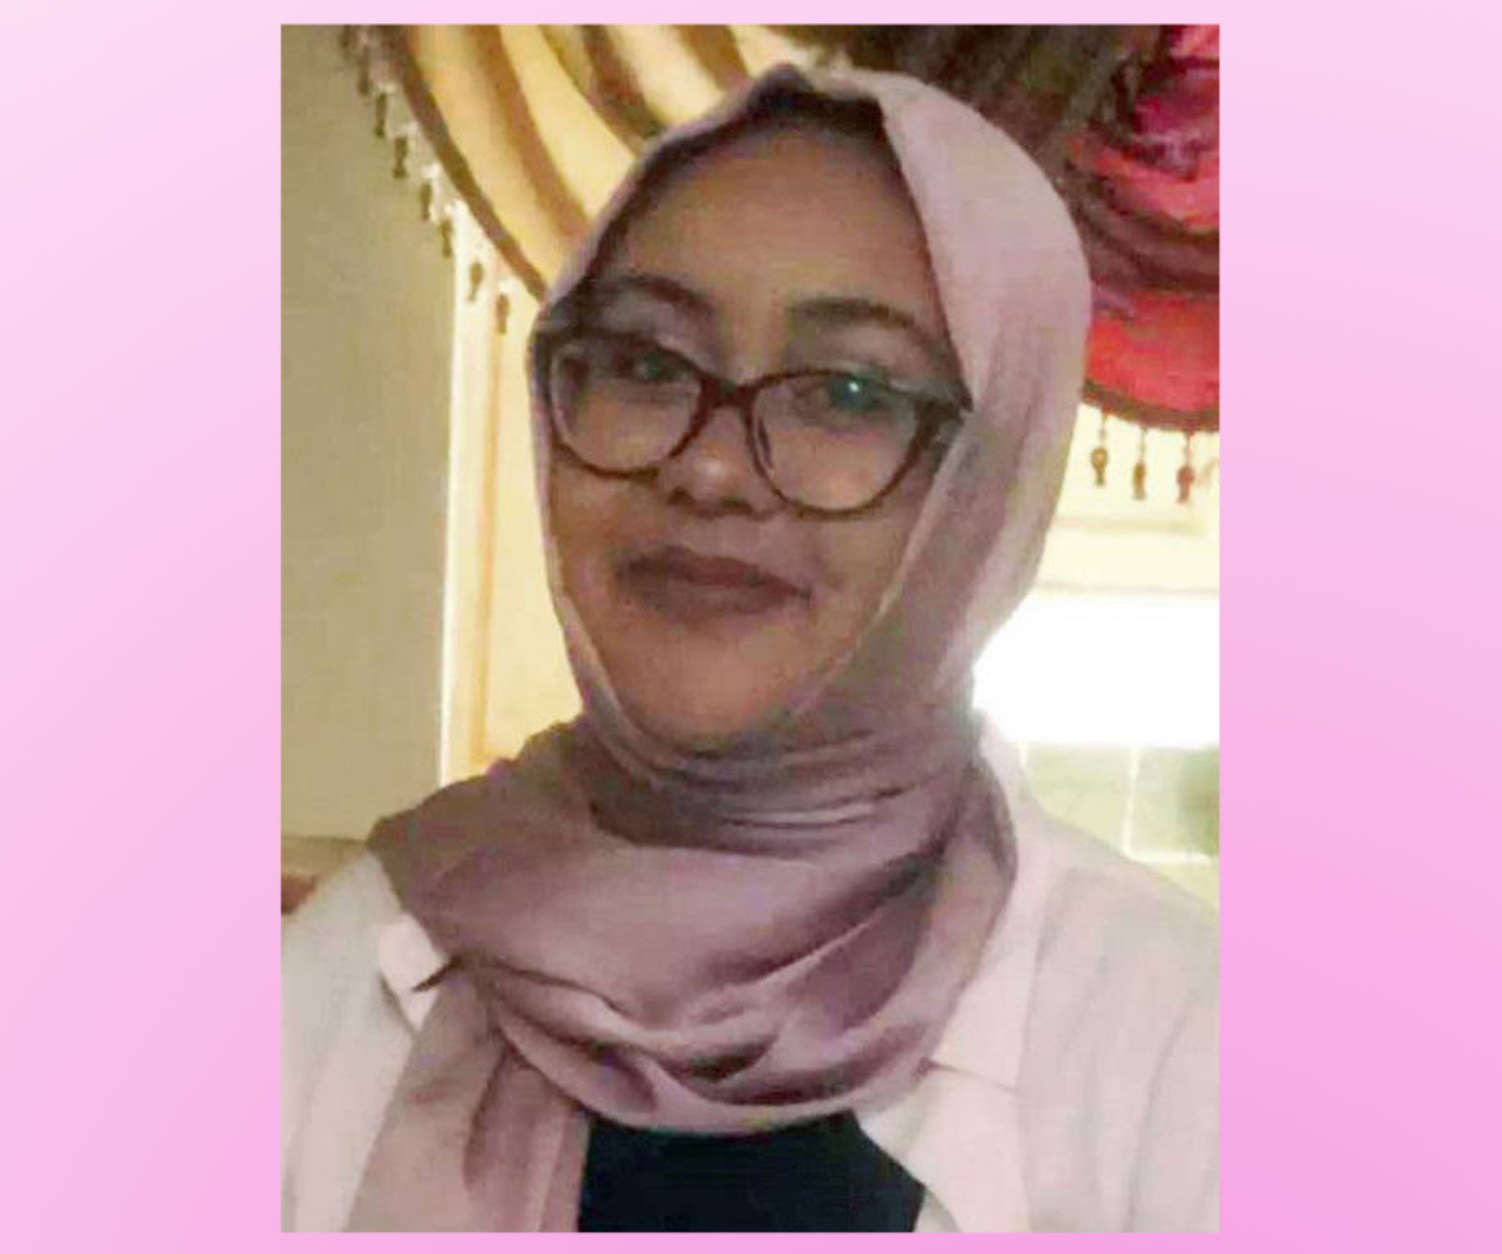 This undated image provided by the Hassanen family shows Nabra Hassanen in Fairfax, Va. Police in Fairfax, Va., said Monday, June 19, 2017, that "road rage" was to blame for the slaying of a 17-year-old muslim girl who was walking with friends to her mosque between Ramadan prayers this weekend. Police have not identified Hassanen, but her father confirmed she was the victim in Sunday's attack. (Courtesy Hassanen Family via AP)